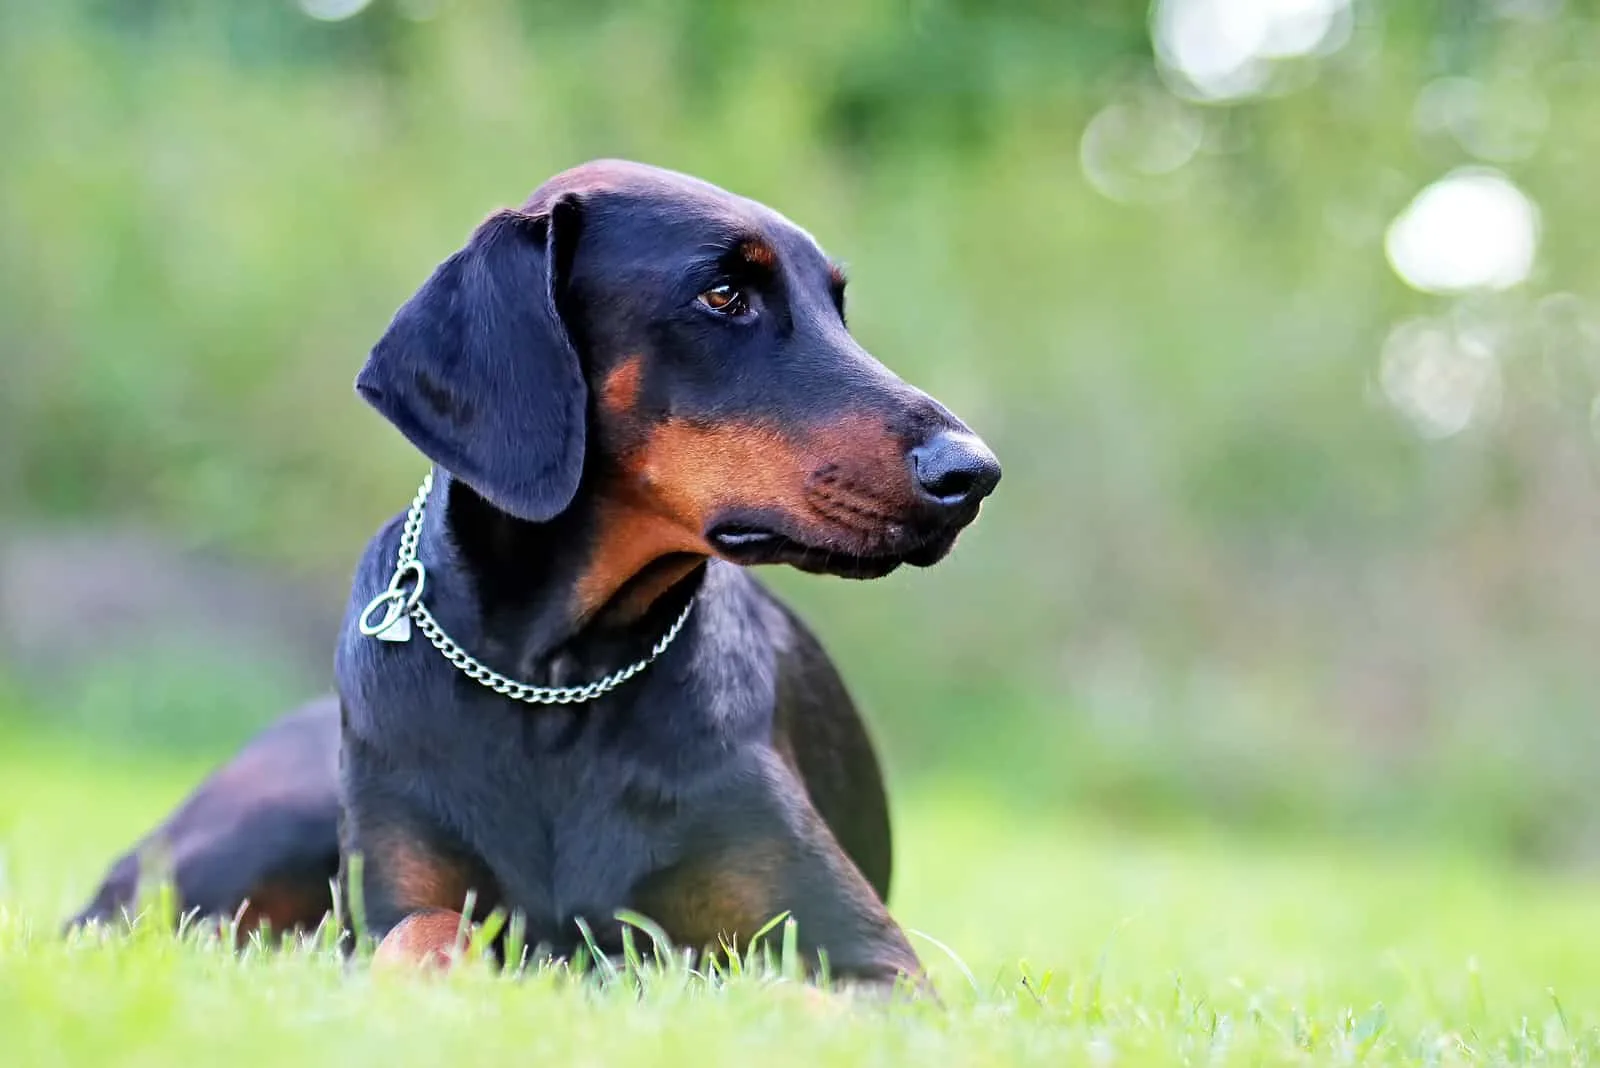 doberman with uncropped ears sitting